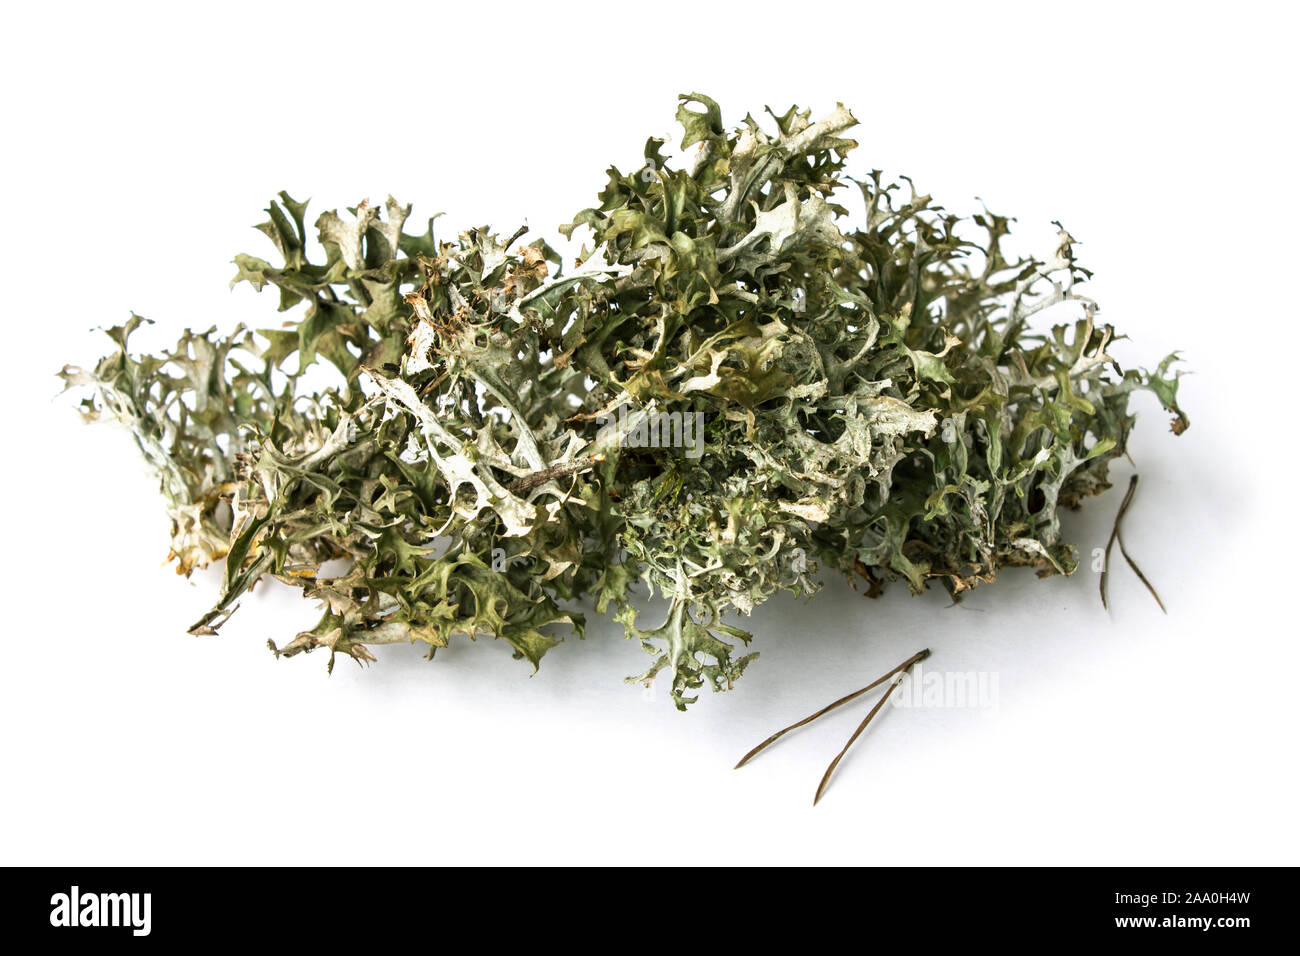 Phytotherapy. Herbal Alternative Medicine. Plant moss Cetraria islandica on a white background Stock Photo